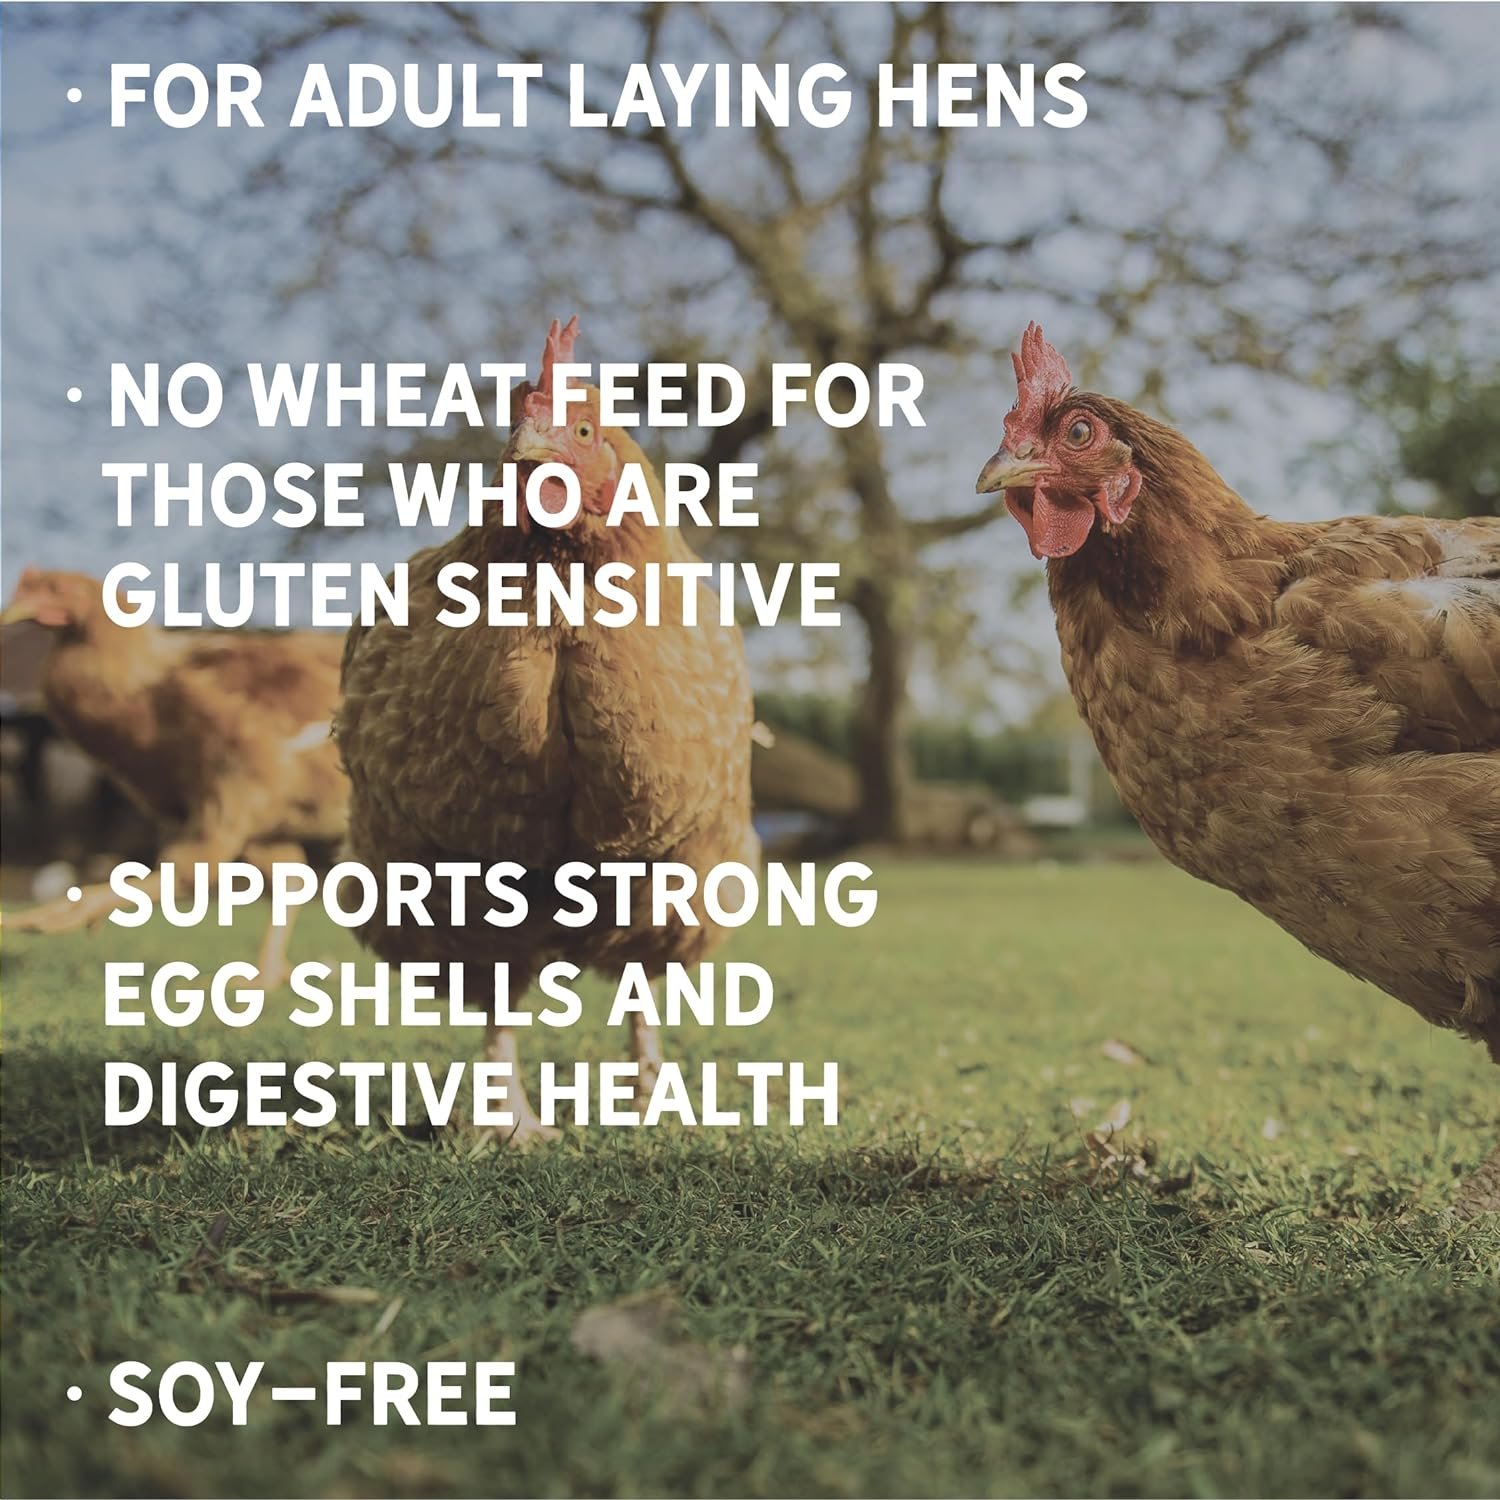 New Country Organics | Wheat-Free Chicken Feed 25lbs | Layer Feed for Laying Hens | Gluten-Free and Soy-Free | 17% Protein | Certified Organic and Non-GMO Chicken Food | 25 lbs Bag